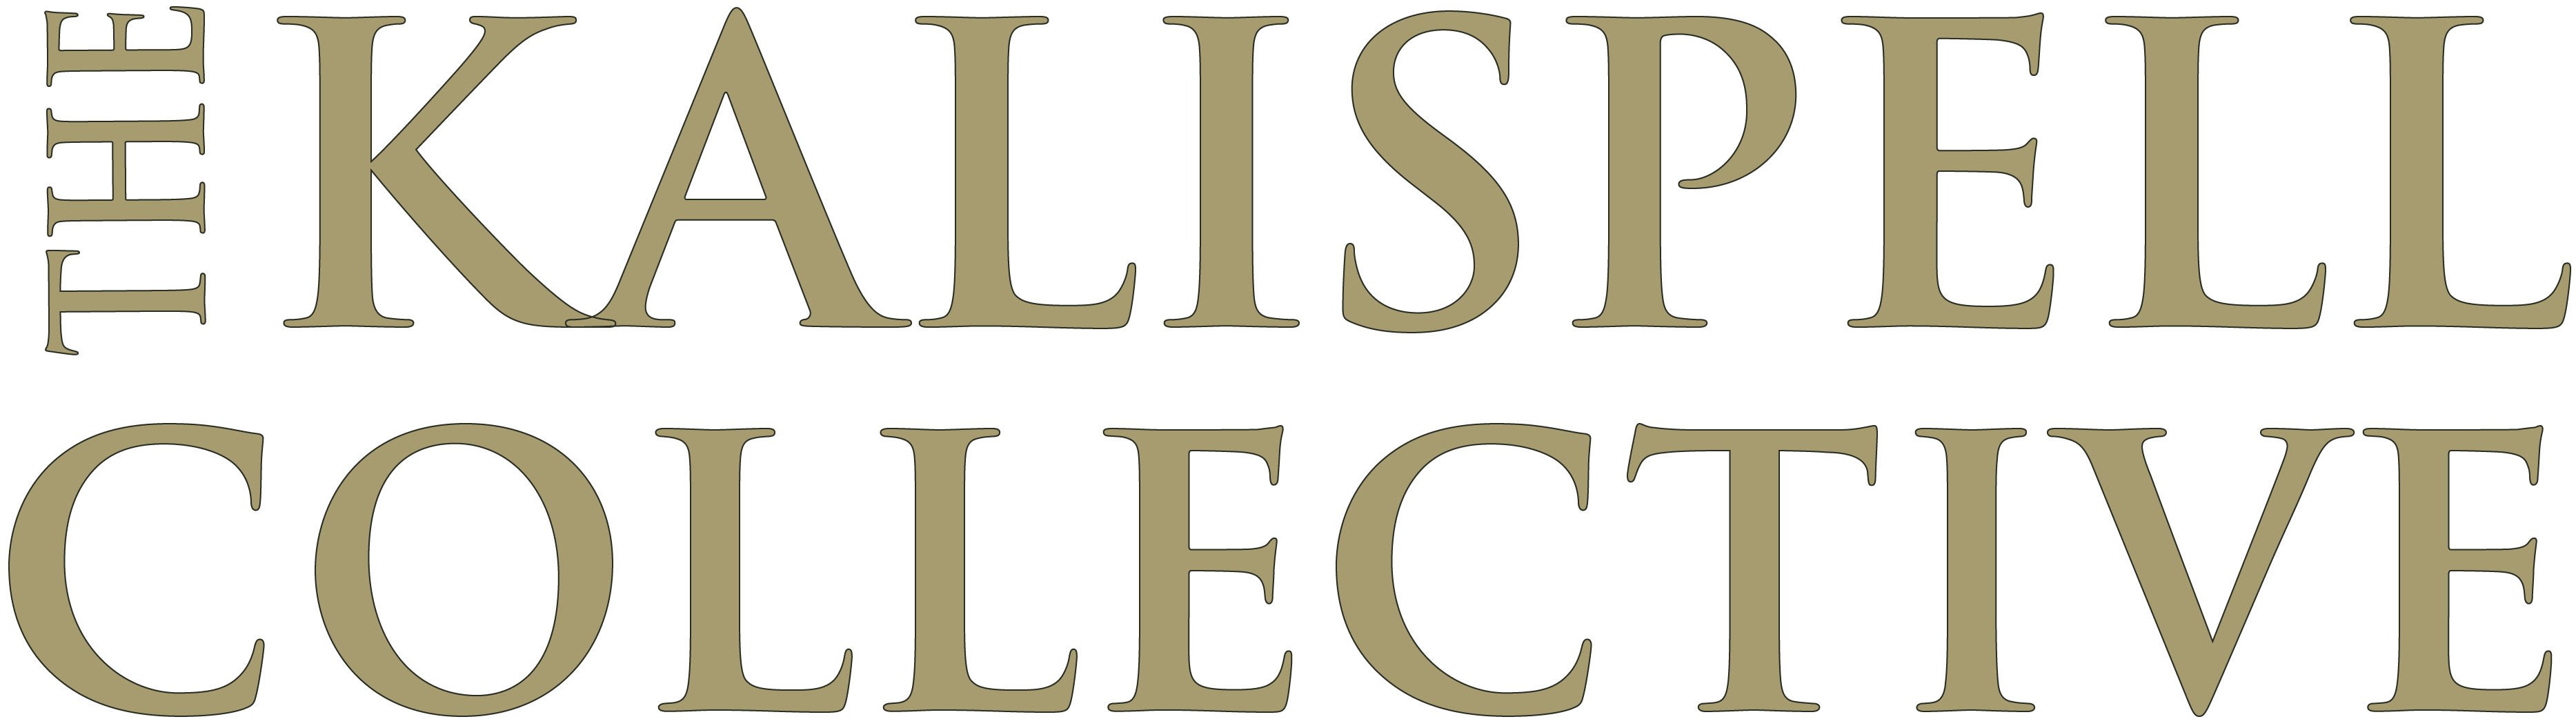 The Kalispell Collective